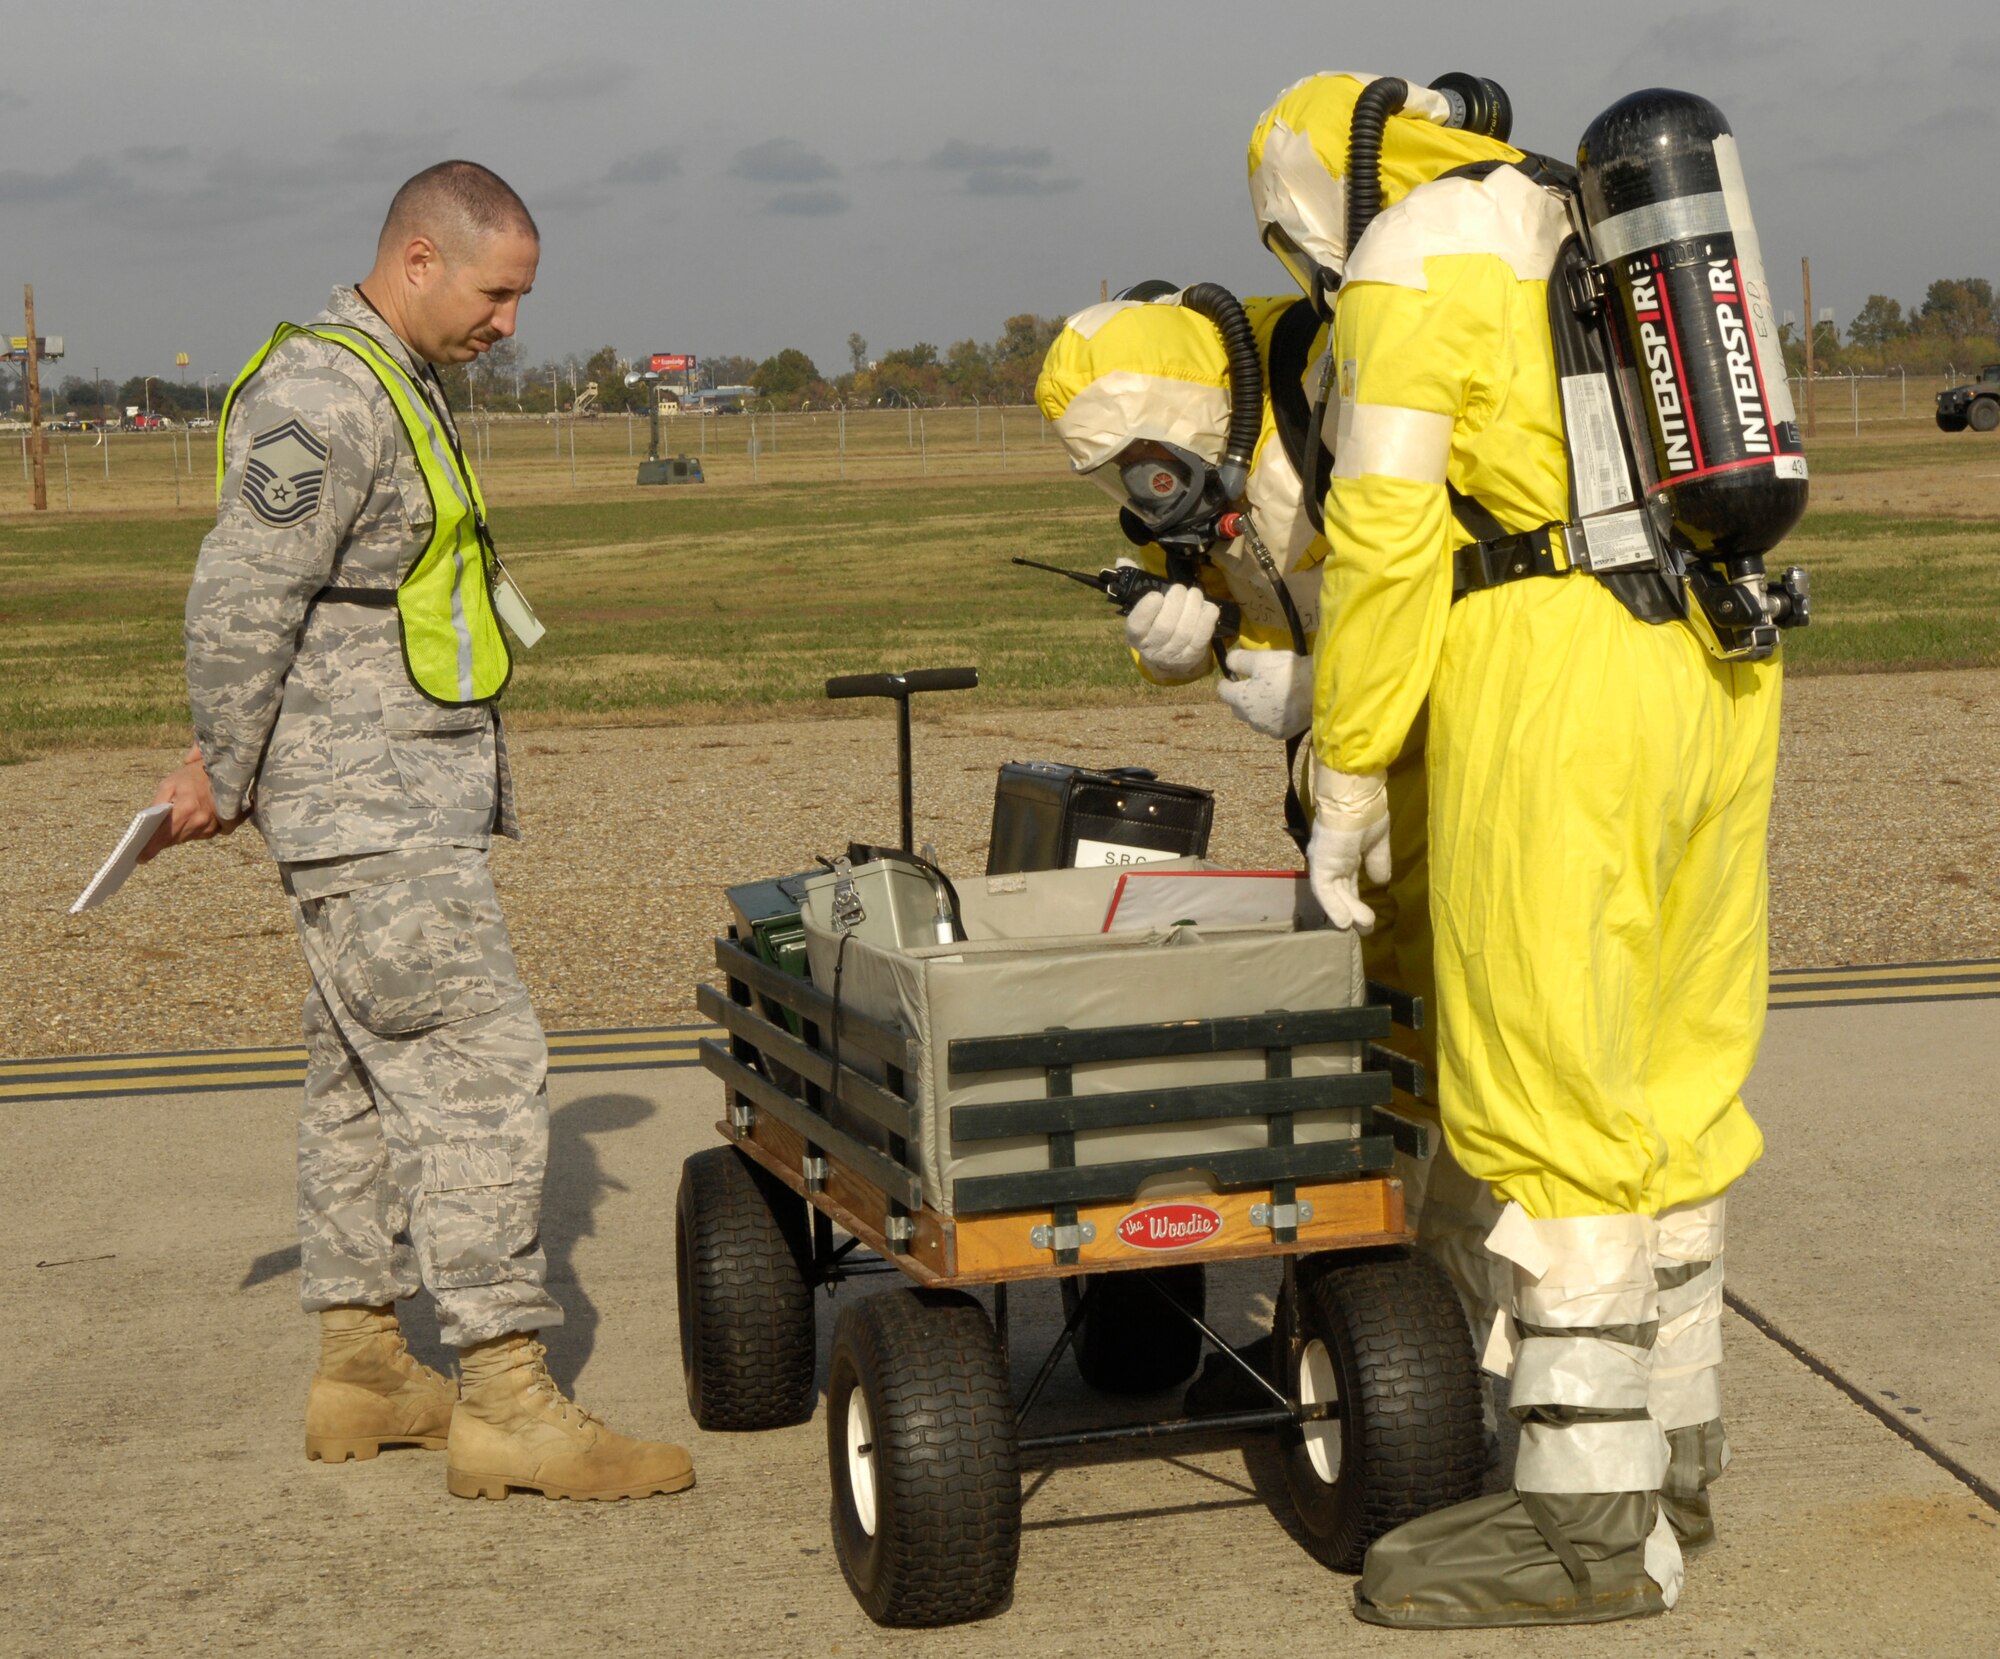 BARKSDALE AIR FORCE BASE, La. -- Members of the Explosive Ordinance Disposal team are evaluated during a portion of the Air Combat Command Nuclear Surety Inspection here Nov.12. Base Officials welcomed members of the ACC Inspector General team Nov. 9 to focus on three major graded areas throughout the inspection: Nuclear surety program management and administration, the personnel reliability program and logistics movement. (Air Force photo by Senior Airman Alexandra Sandoval) 